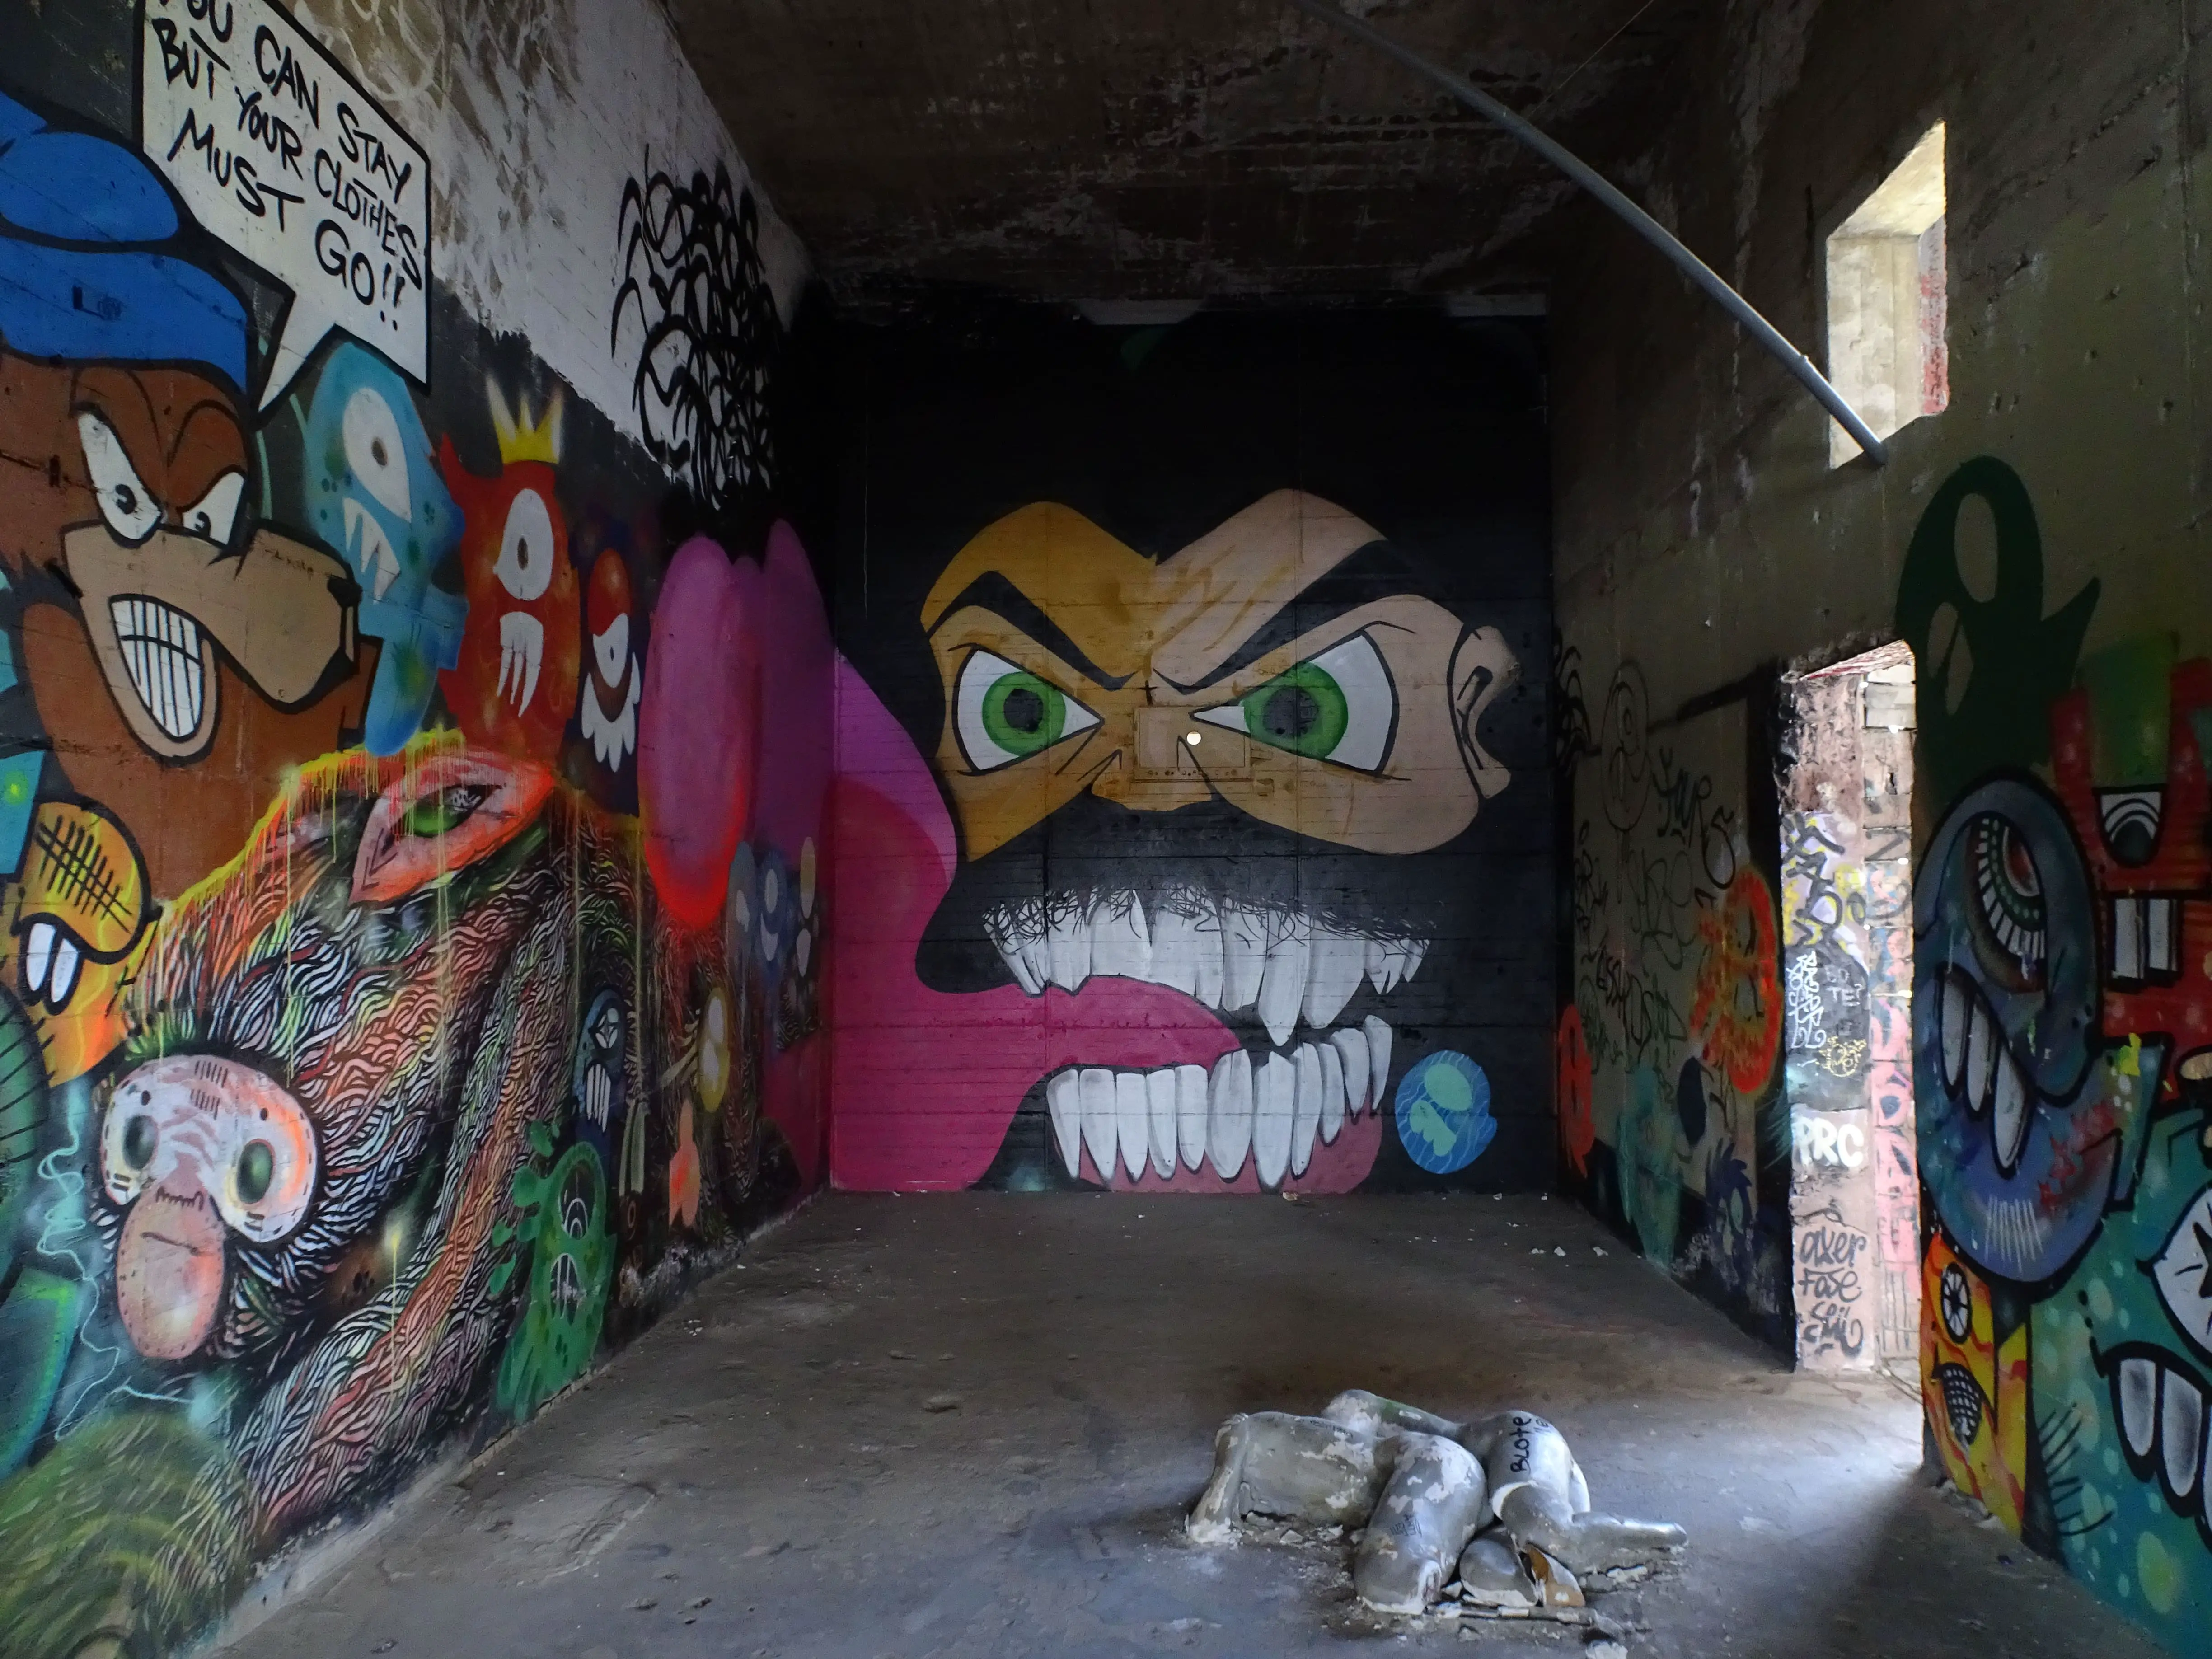 A graffiti of a grinning bearded man in a dark room